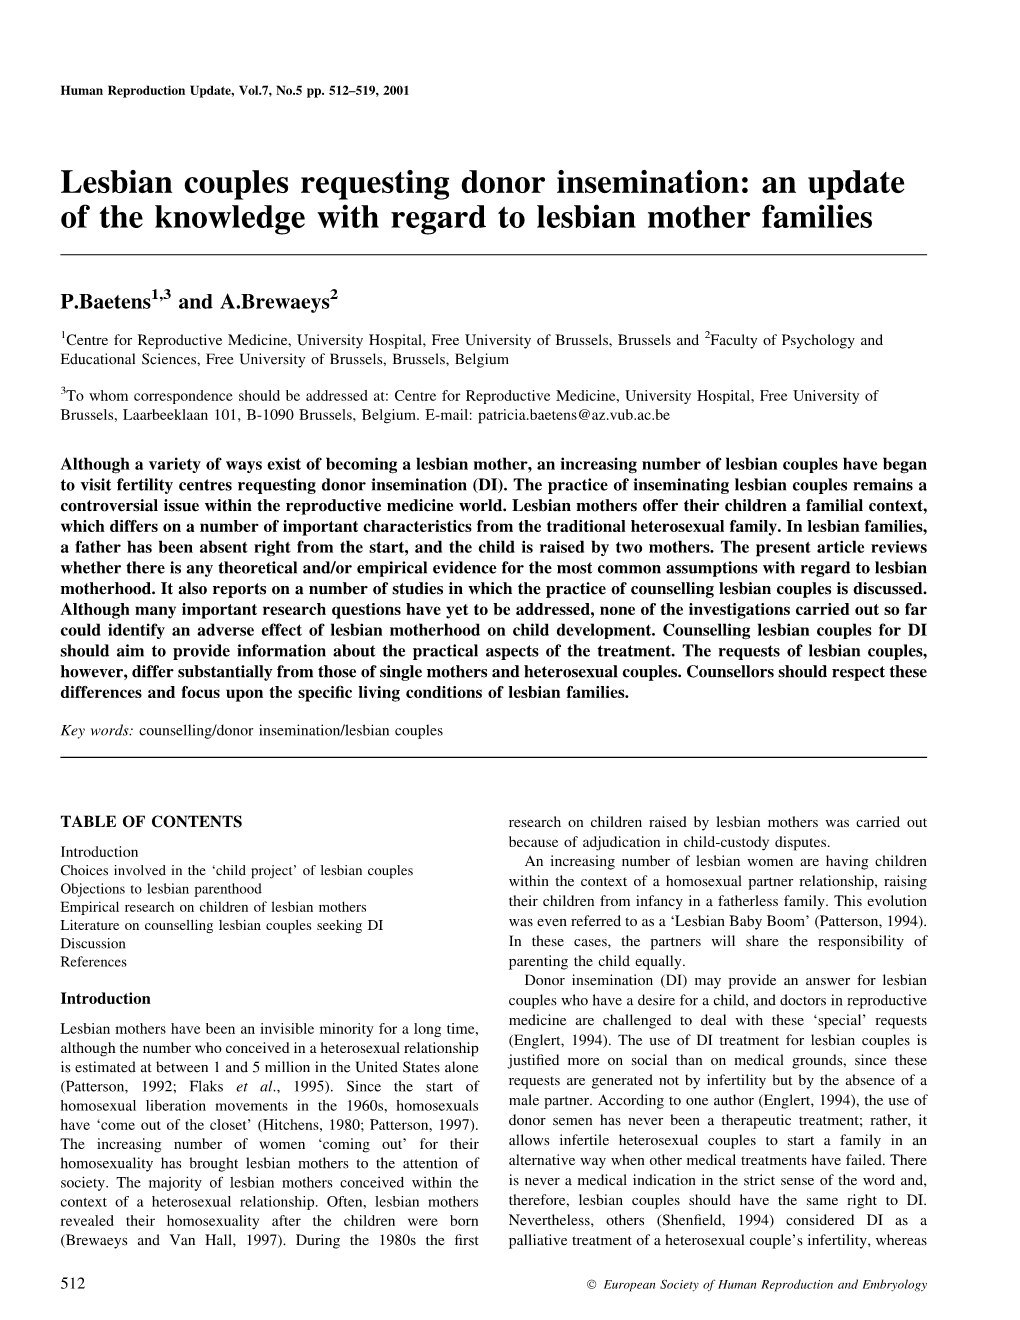 Lesbian Couples Requesting Donor Insemination: an Update of the Knowledge with Regard to Lesbian Mother Families